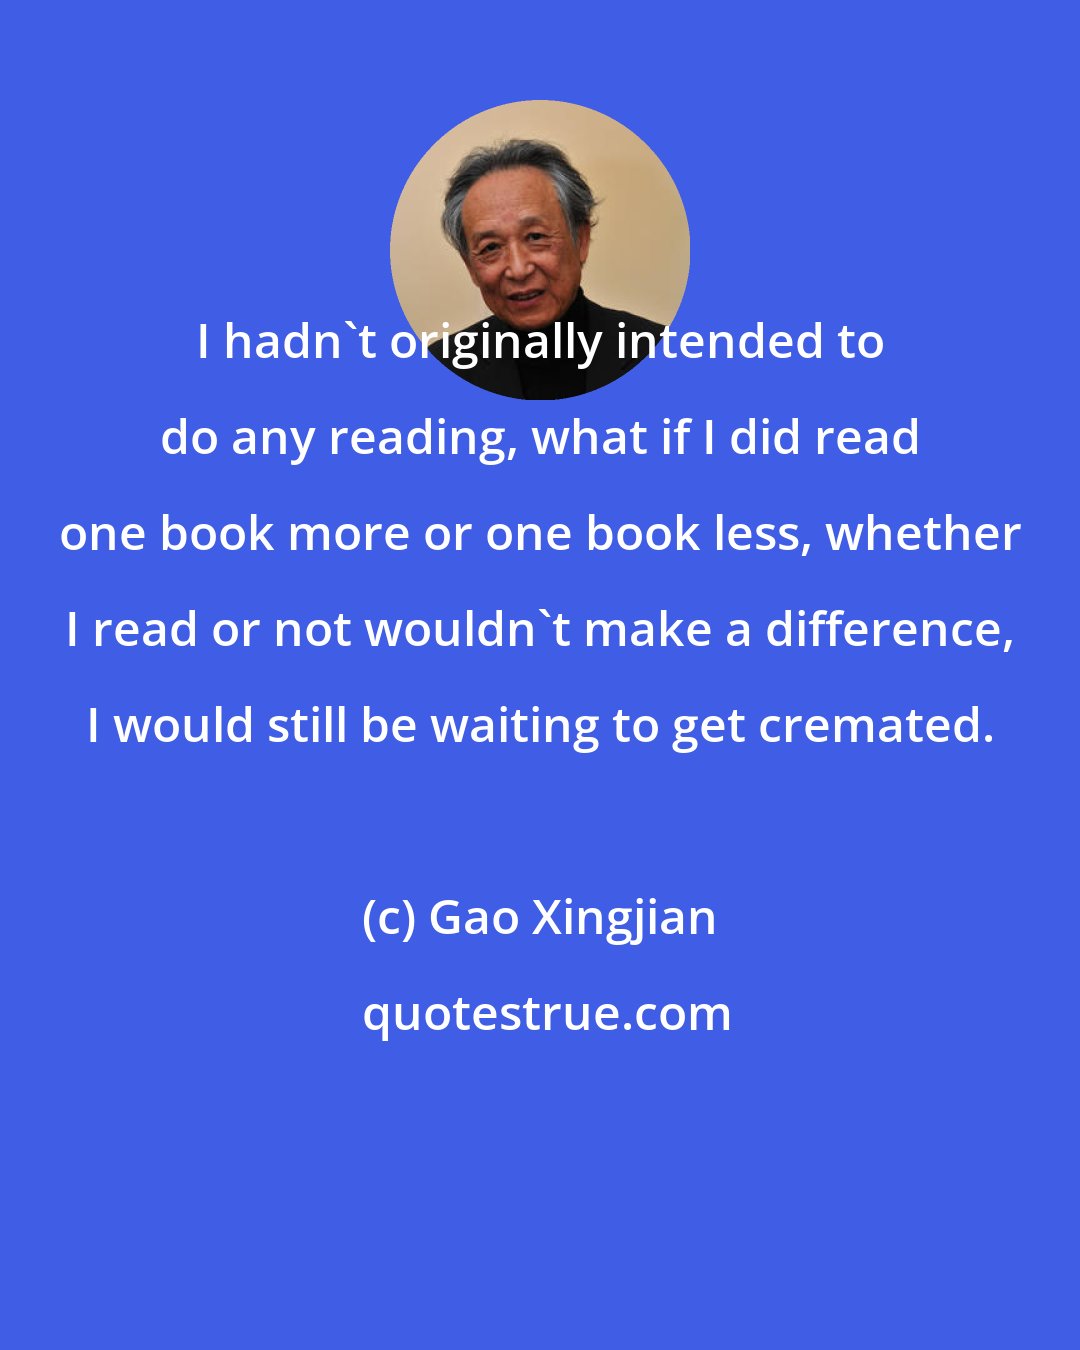 Gao Xingjian: I hadn't originally intended to do any reading, what if I did read one book more or one book less, whether I read or not wouldn't make a difference, I would still be waiting to get cremated.